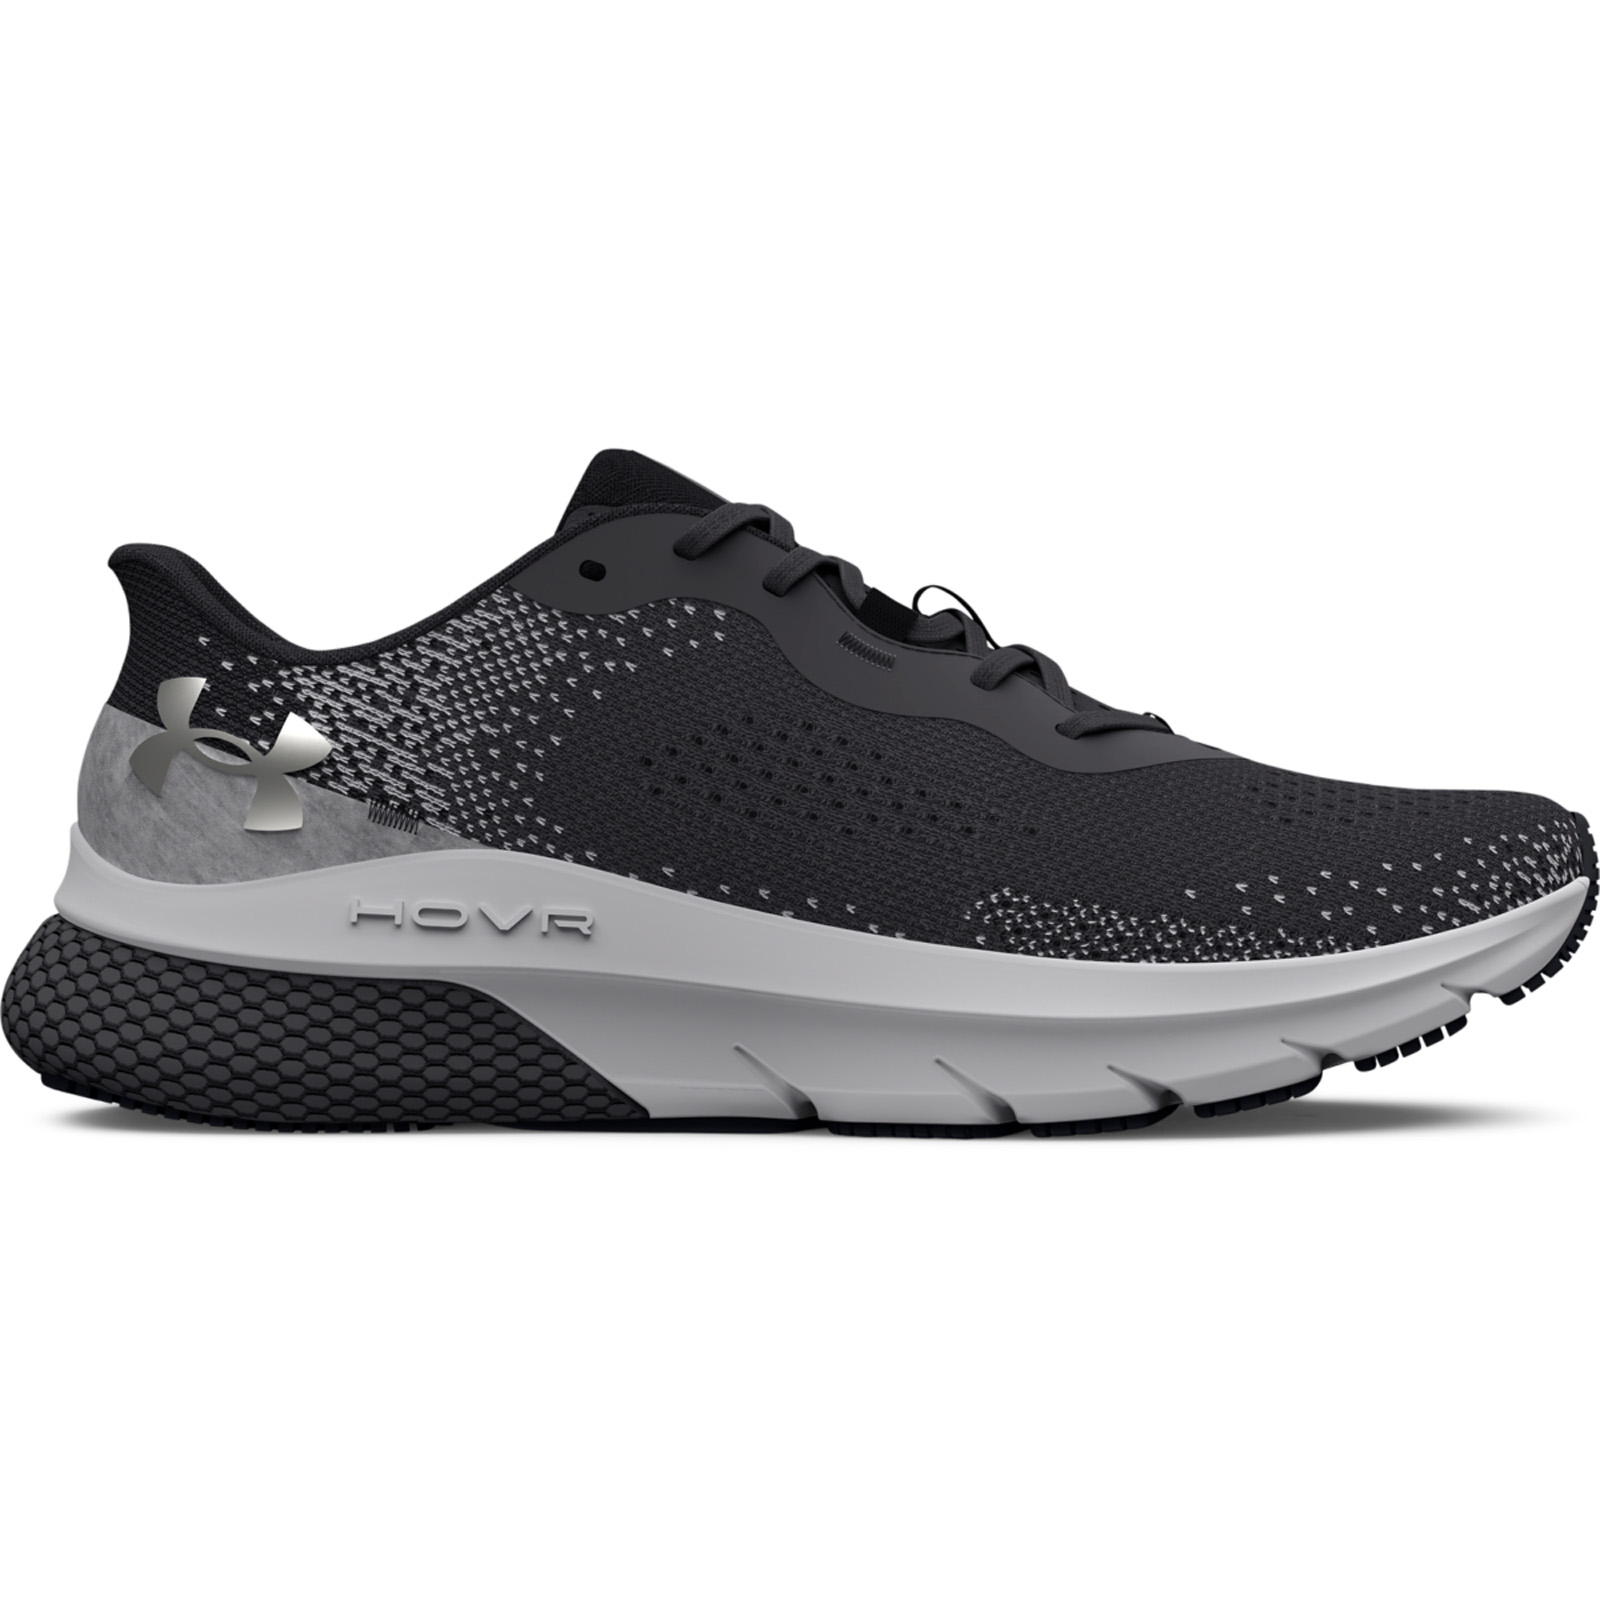 Under Armour - Men's UA HOVR™ Turbulence 2 Running Shoes - Jet Gray/Jet Gray/Metallic Silver Ανδρικά > Παπούτσια > Αθλητικά > Παπούτσι Low Cut